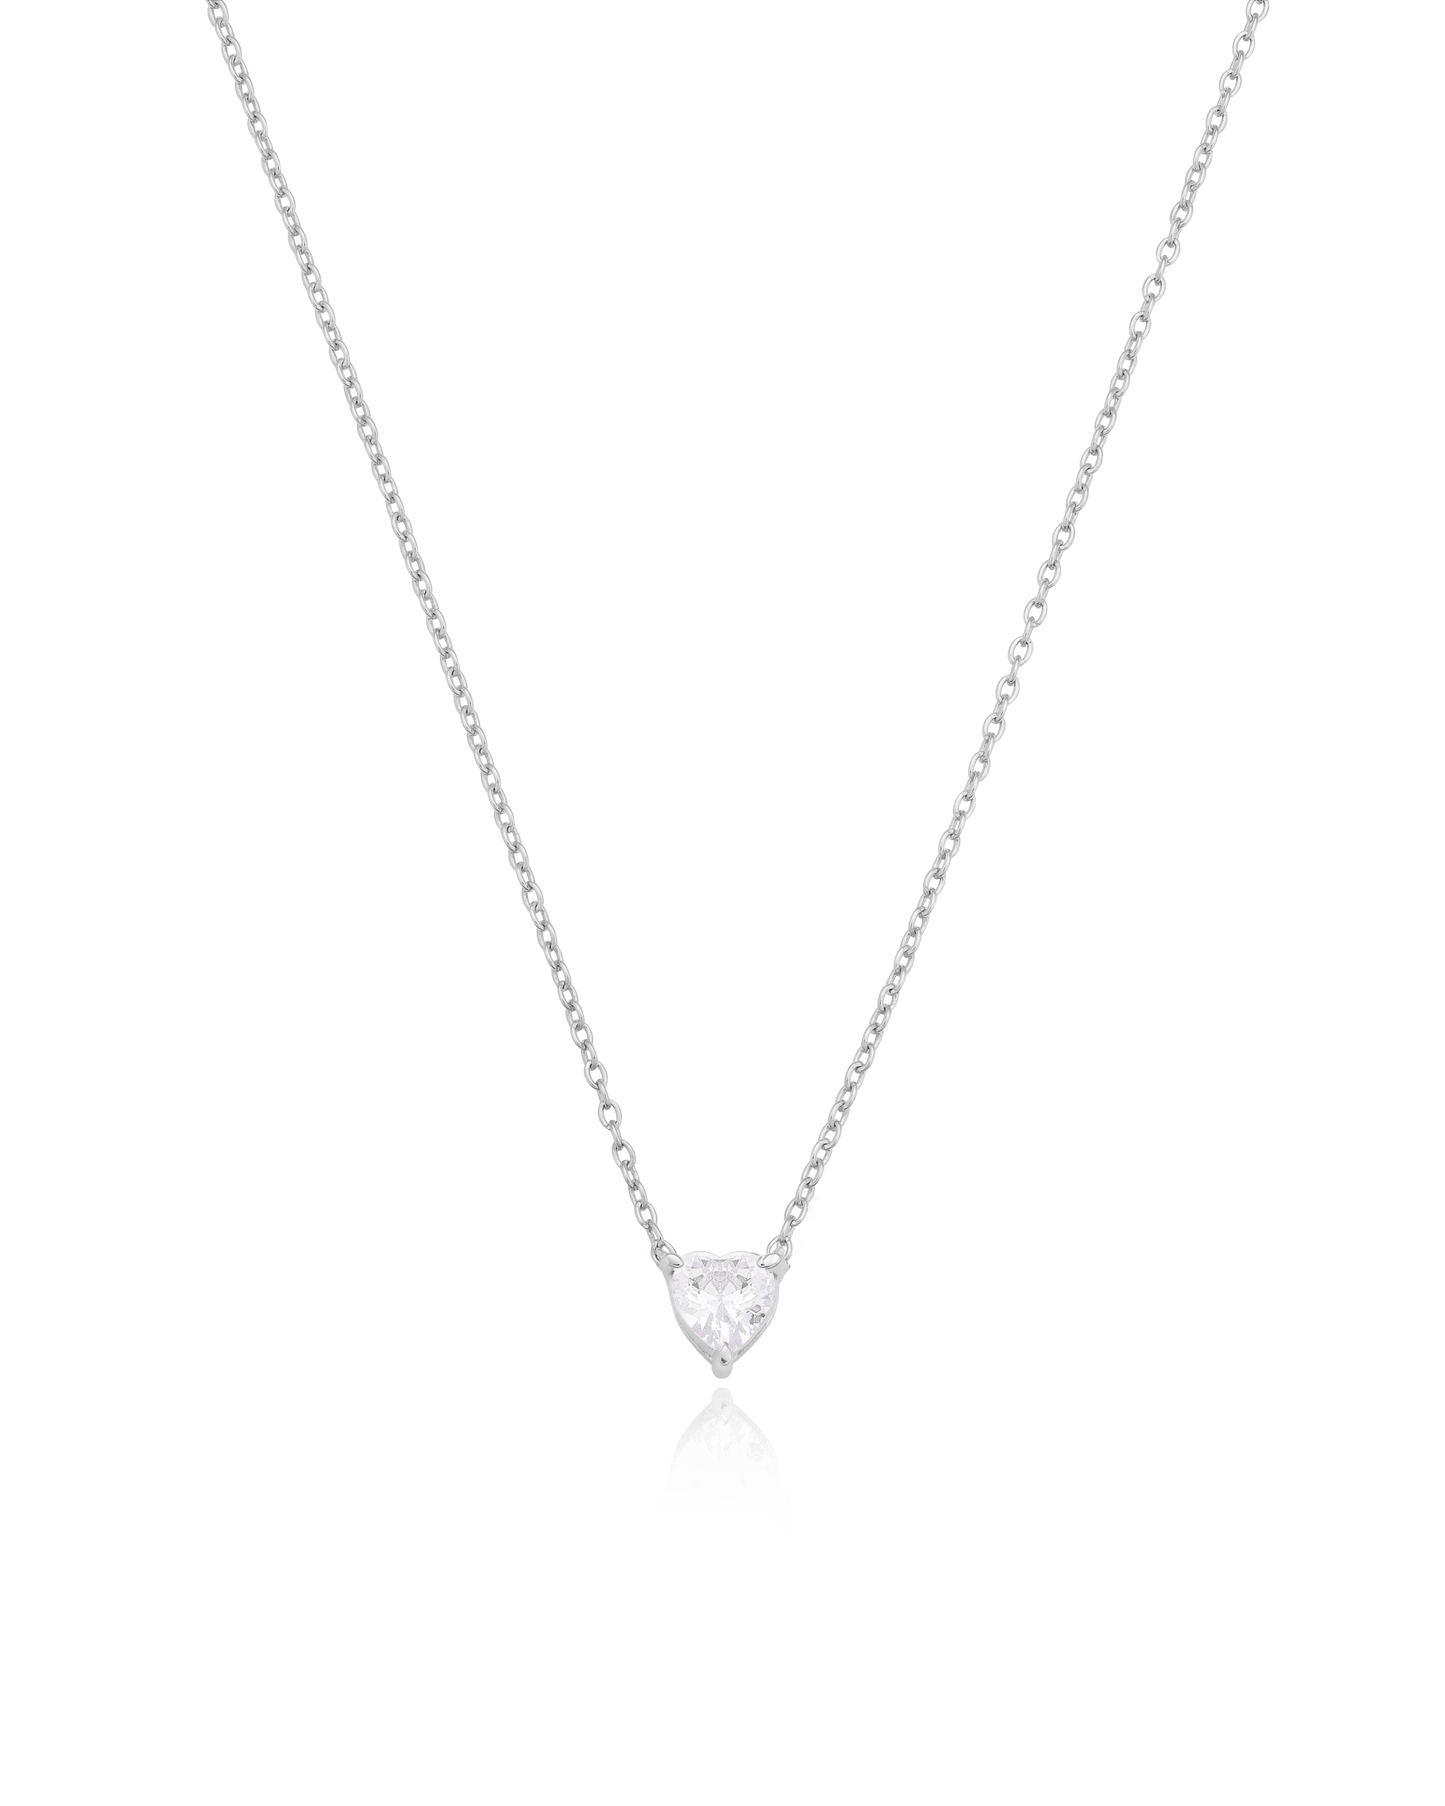 Heart Solitaire Diamond Necklace - 925 Sterling Silver Necklaces magal-dev 